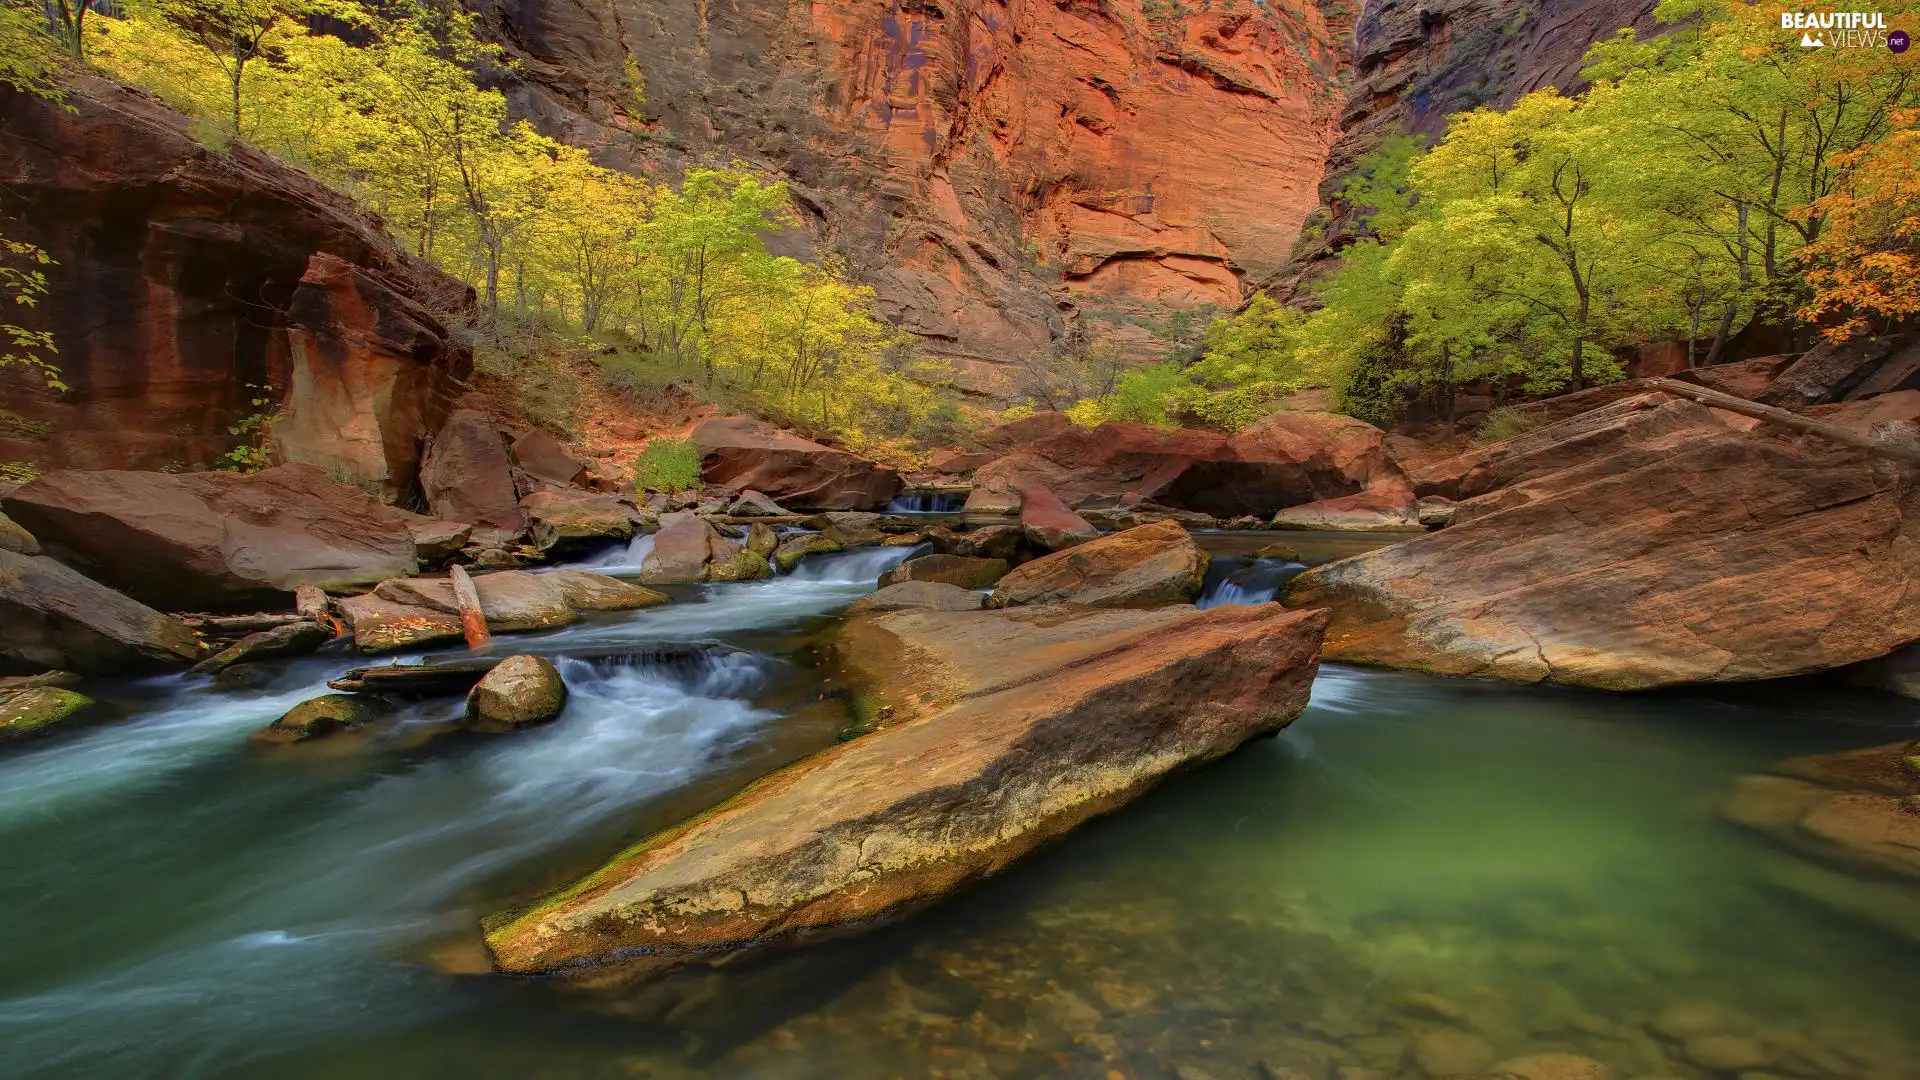 Zion National Park, Virgin River, canyon, rocks, viewes, Utah State, The United States, trees